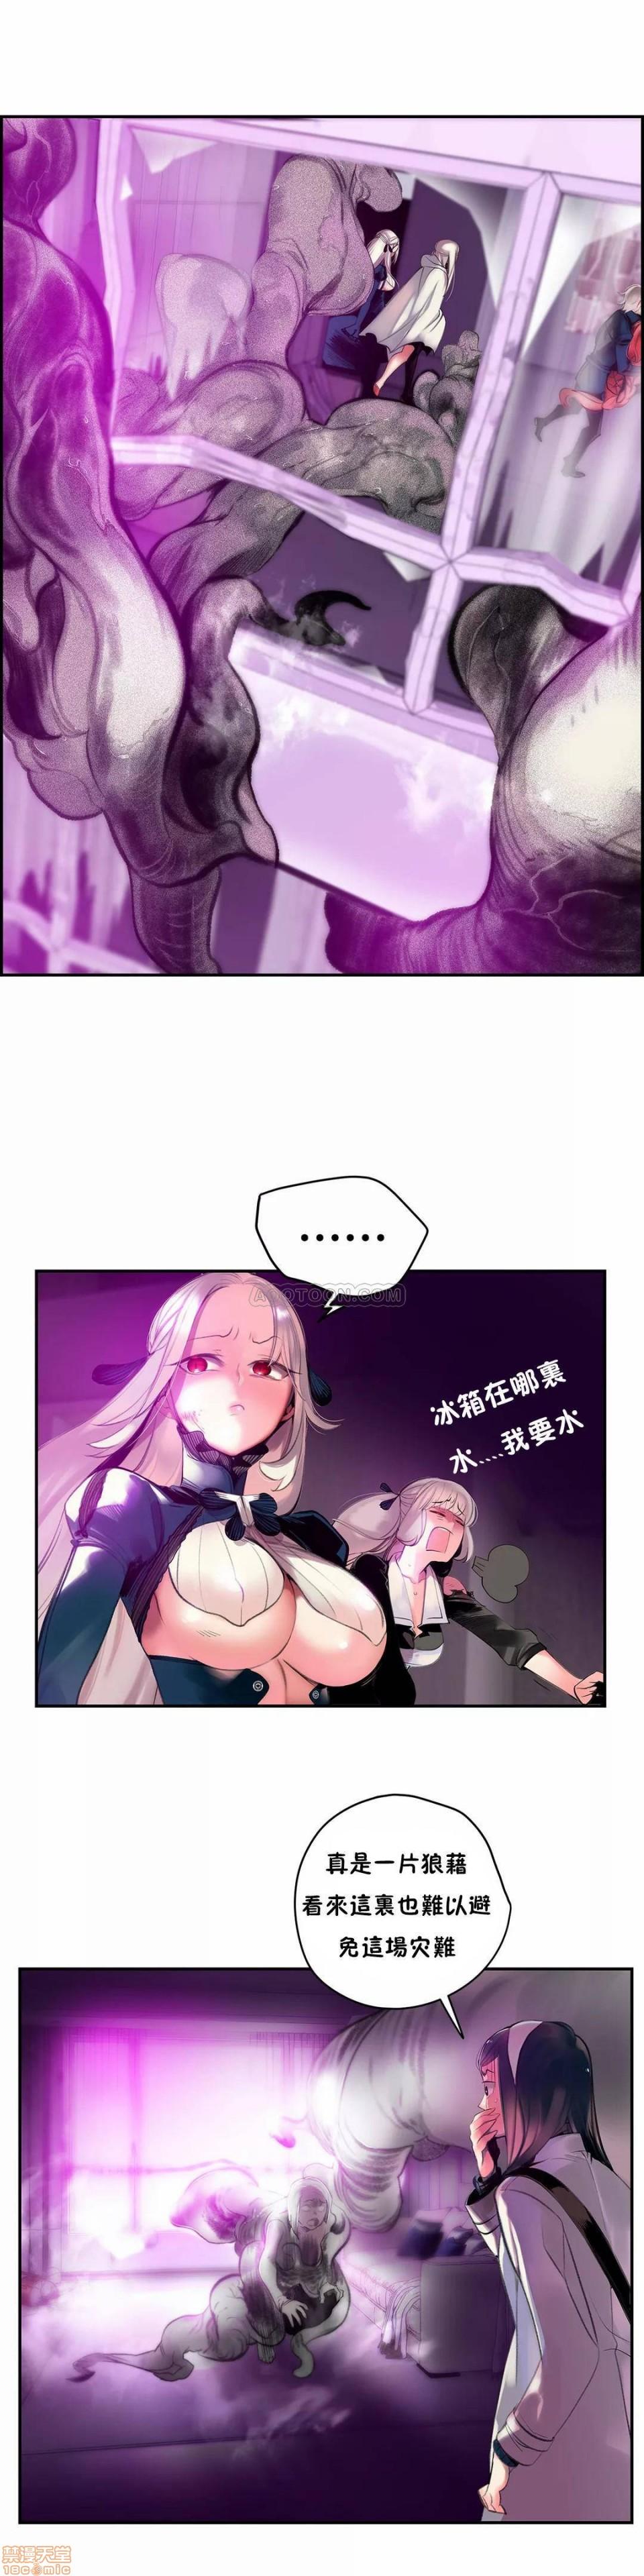 [Juder] Lilith`s Cord (第二季) Ch.77-93 end [Chinese] 3